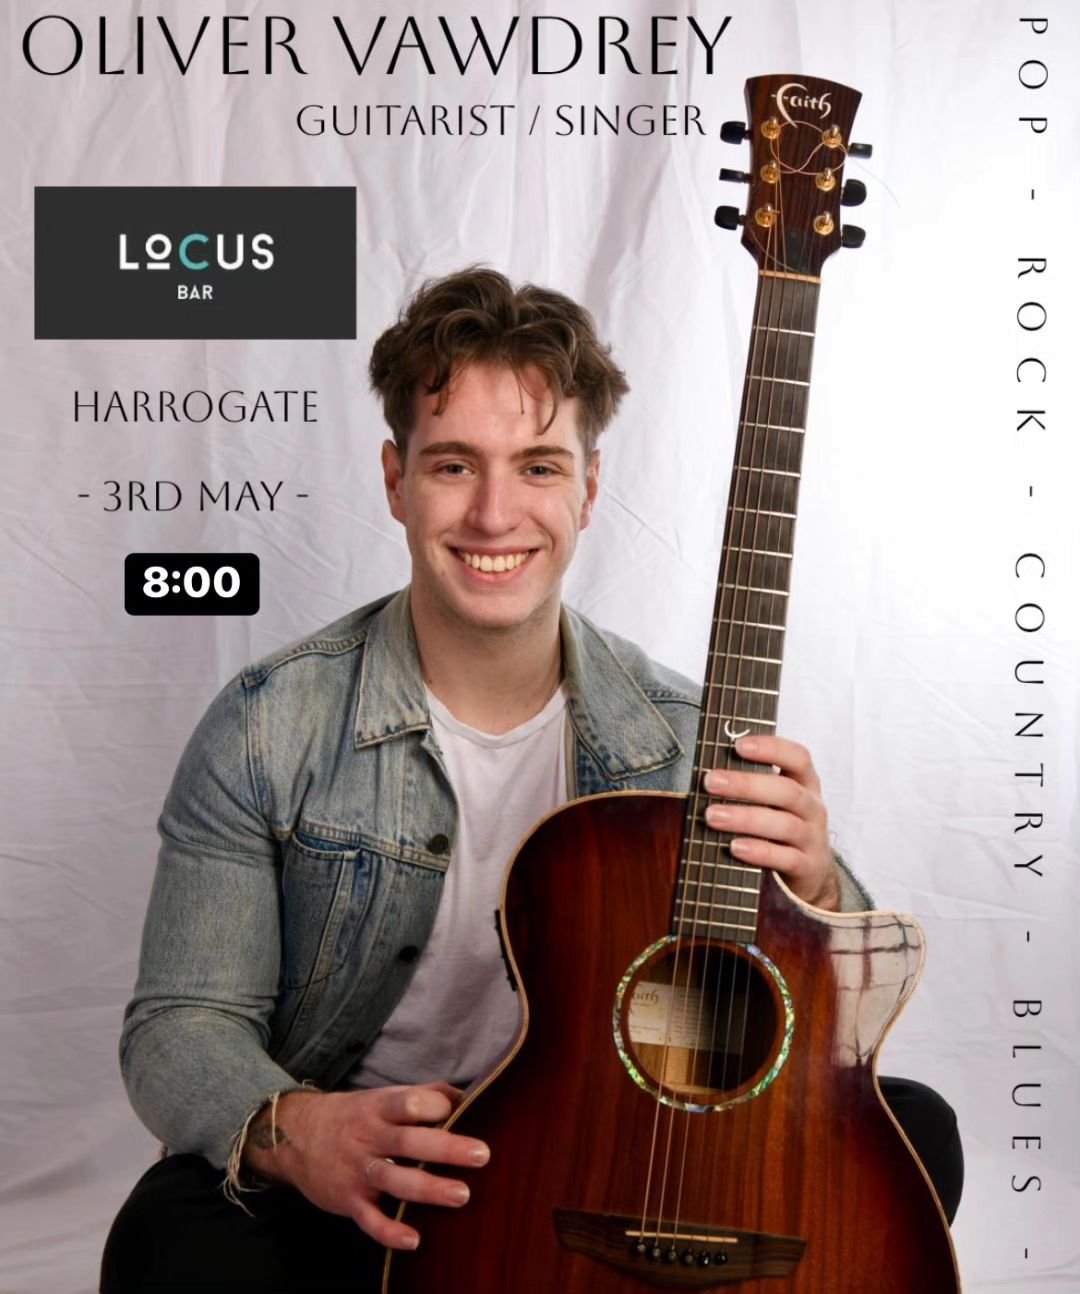 TONIGHT!!

We have @olivervawdrey playing live at 8pm here at @locus_bar_harrogate 🎸 Oliver is a great party starter, so make sure you get down early to secure your seats👀

&bull;

FIZZ FRIDAY ALL NIGHT🥂

&bull;

HAPPY HOURS 5pm-7pm today giving y